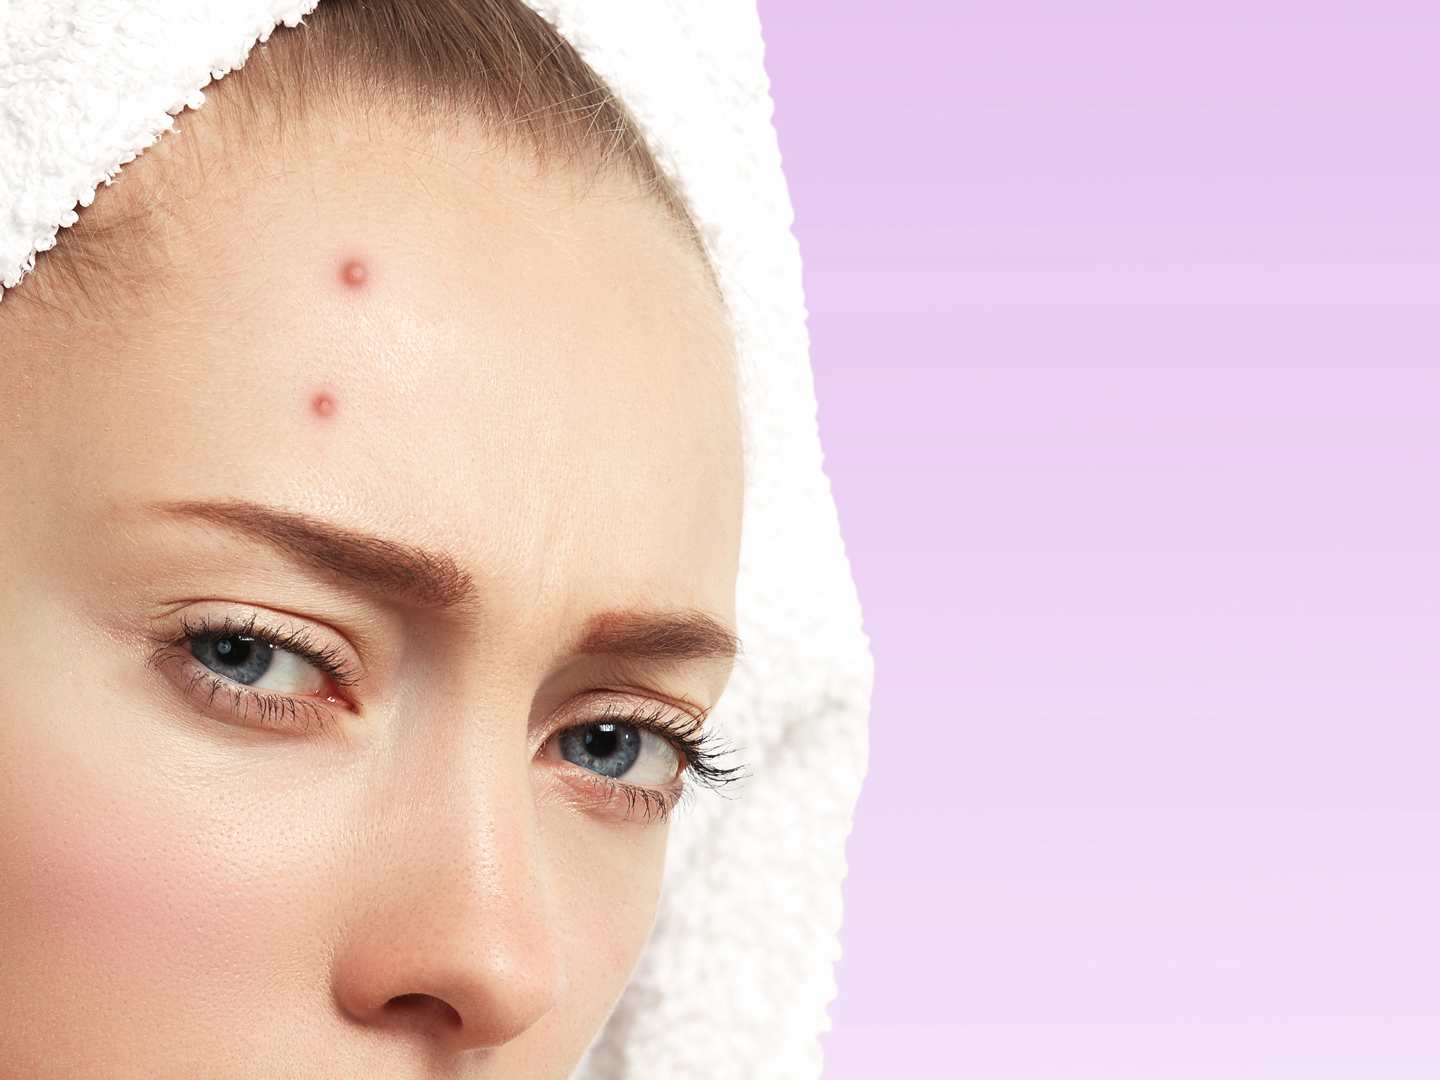 Pimples on Forehead